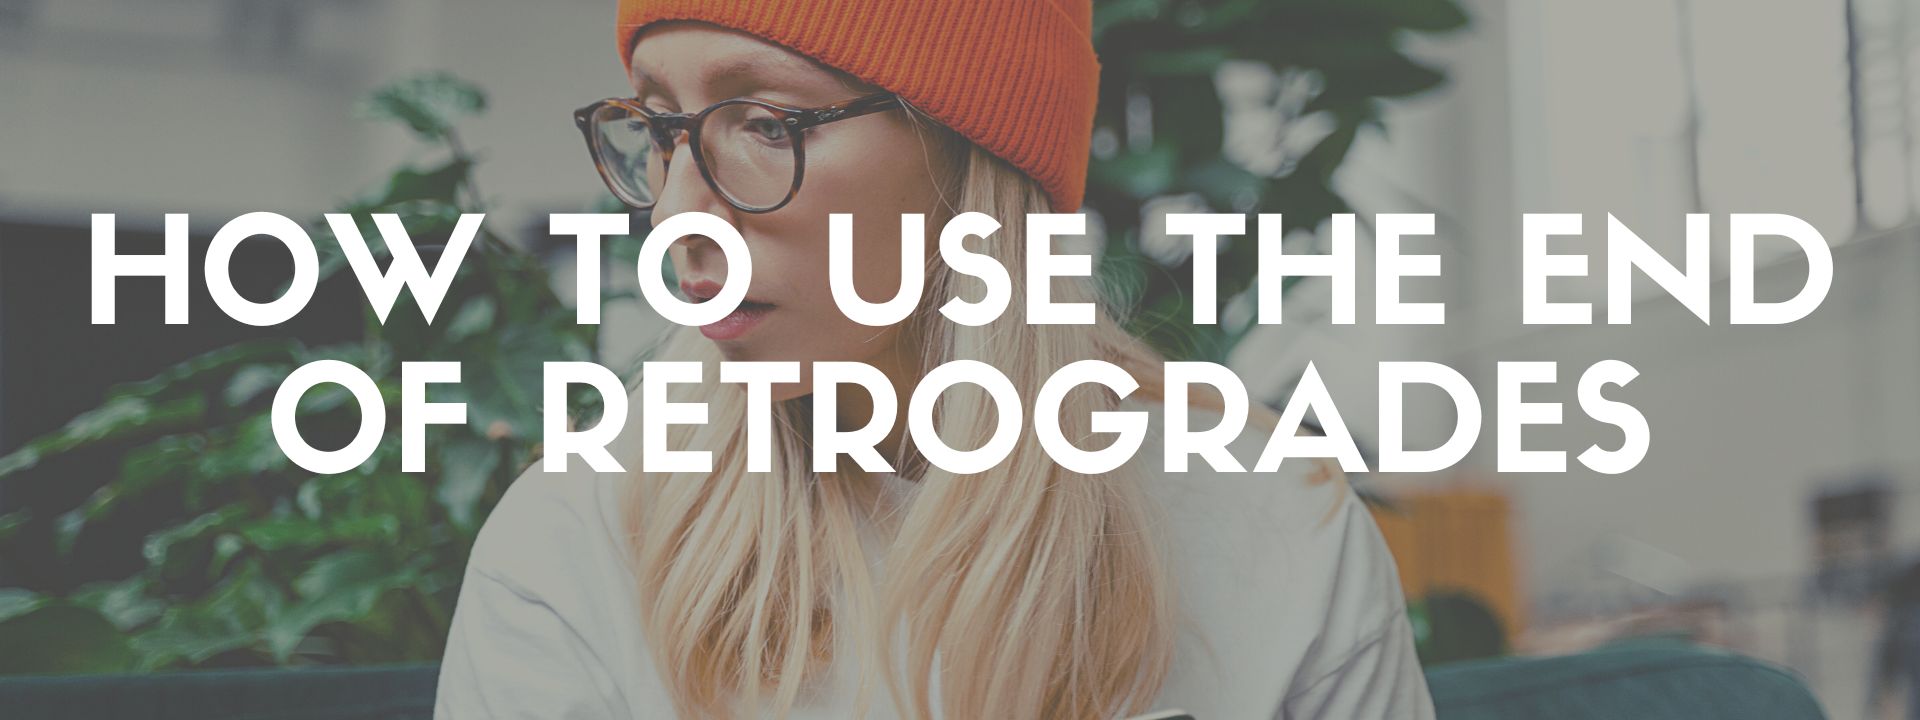 What to Do When Retrogrades End - The Dark Pixie Astrology